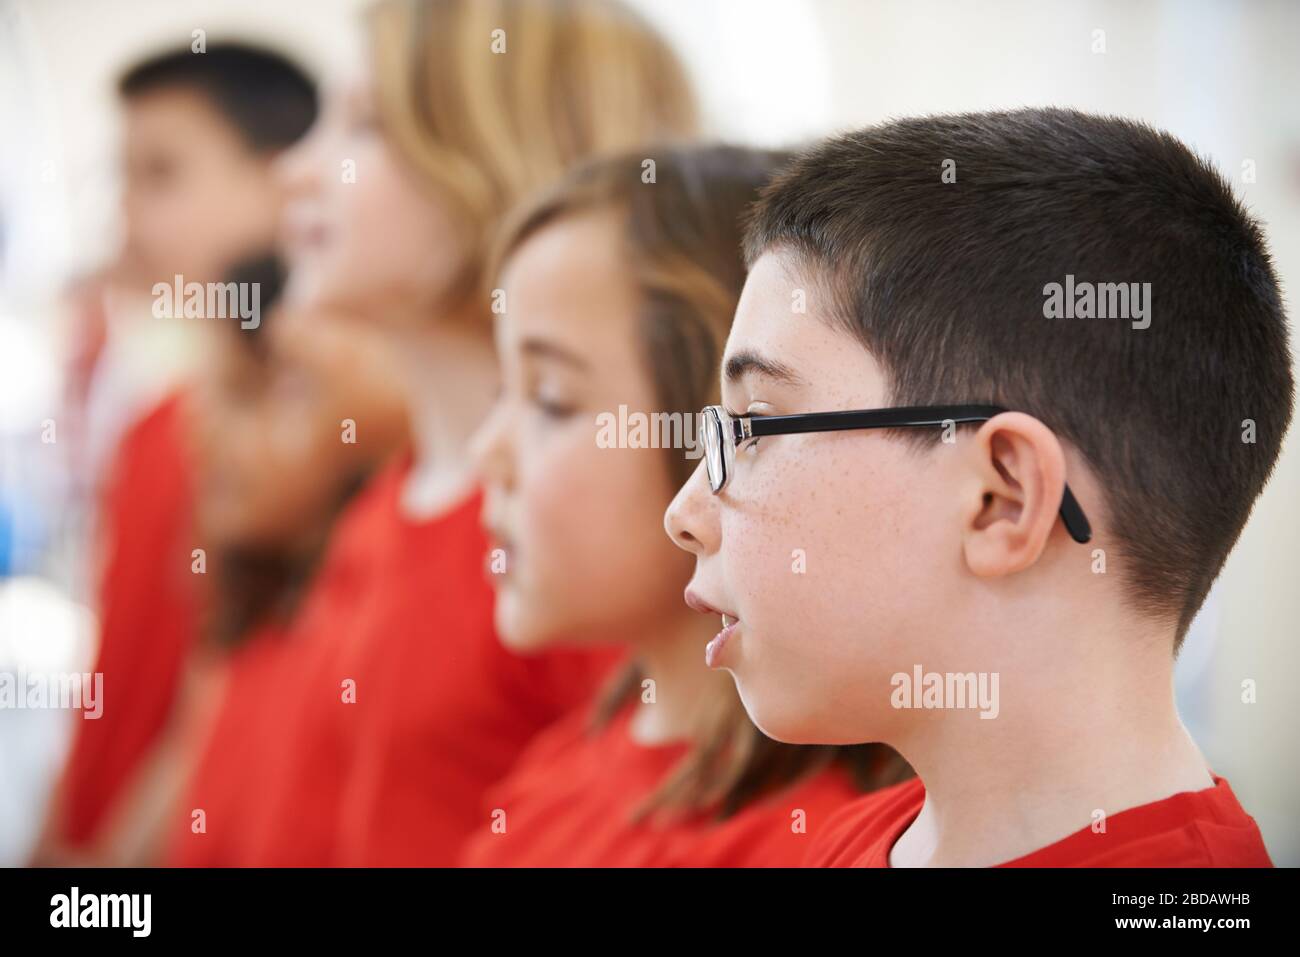 Group Of School Children Singing In Choir At Stage School Together Stock Photo